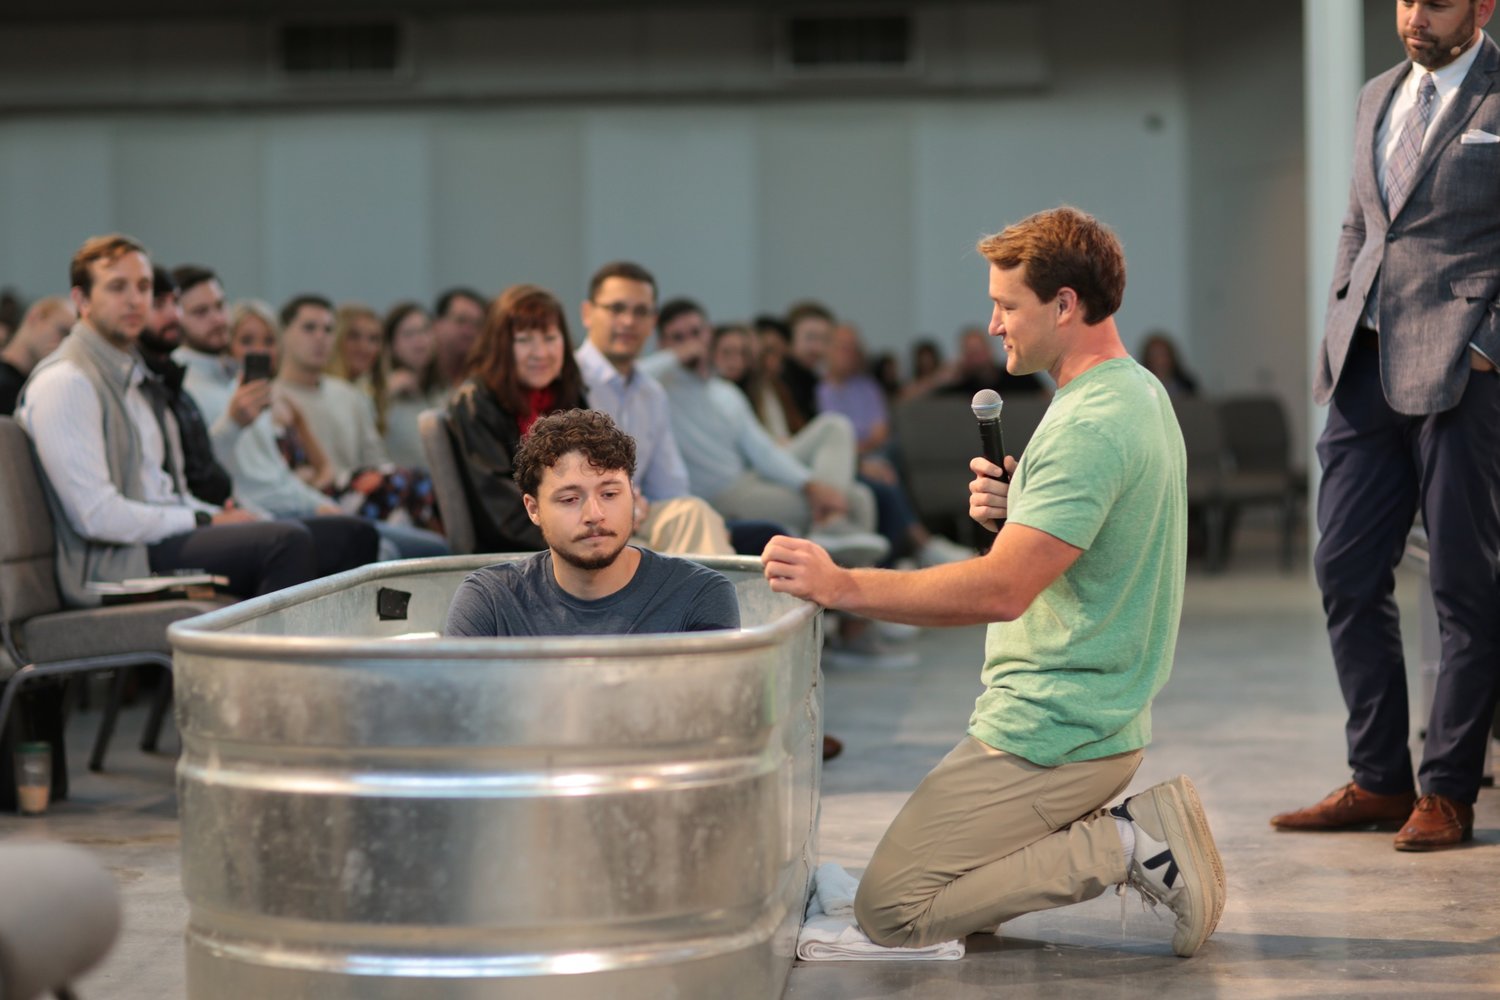 The baptism of new believers has become a regular occurrence at Christ Covenant.